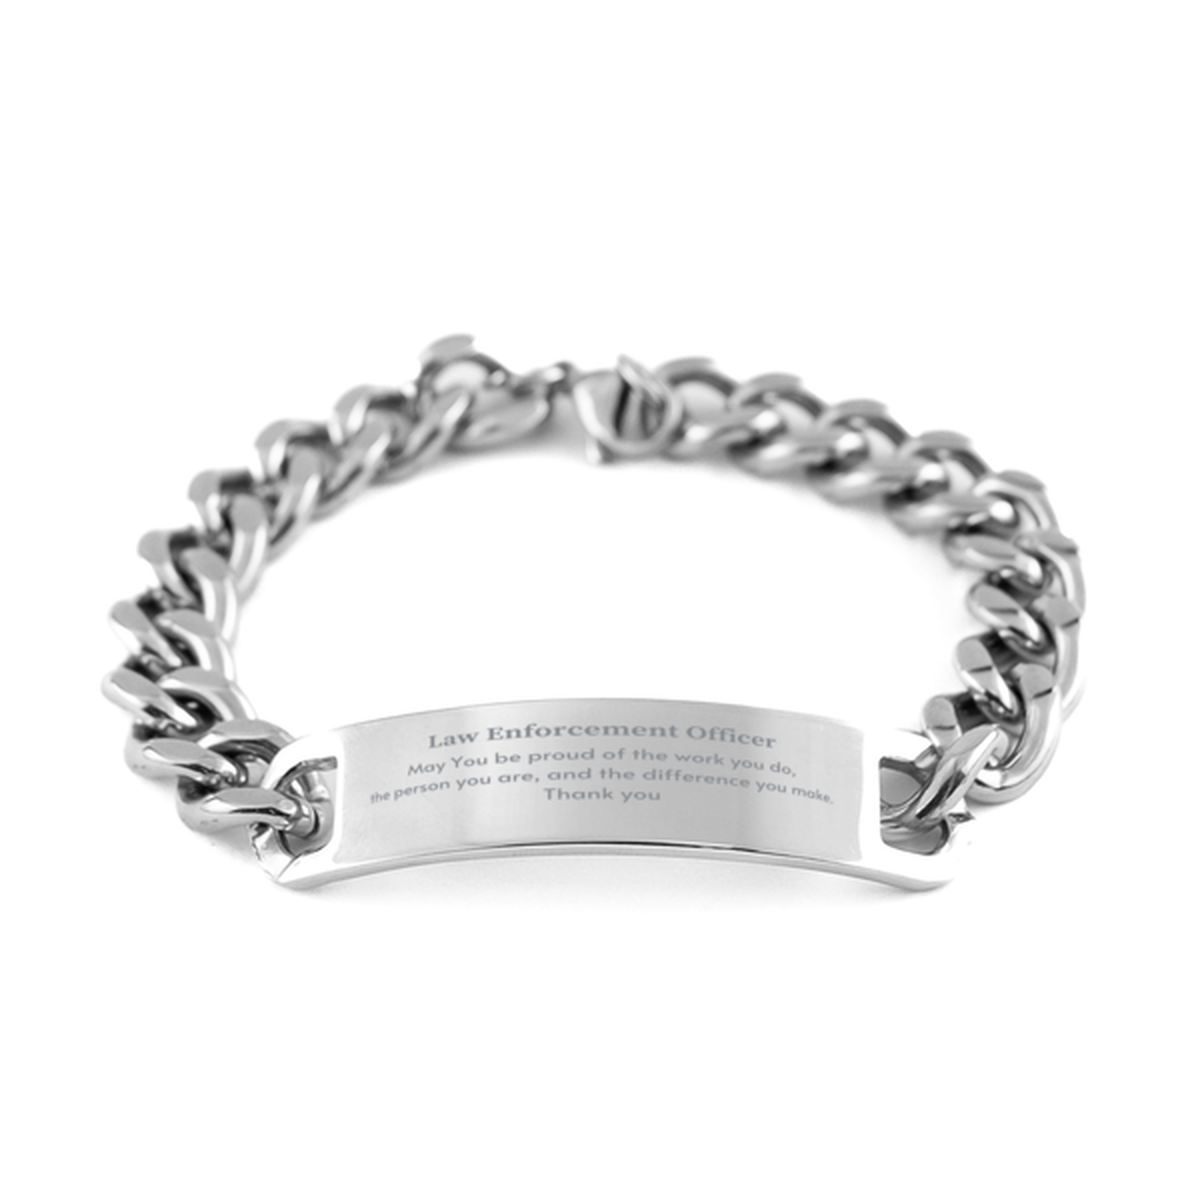 Heartwarming Cuban Chain Stainless Steel Bracelet Retirement Coworkers Gifts for Law Enforcement Officer, Law Enforcement Officer May You be proud of the work you do, the person you are Gifts for Boss Men Women Friends